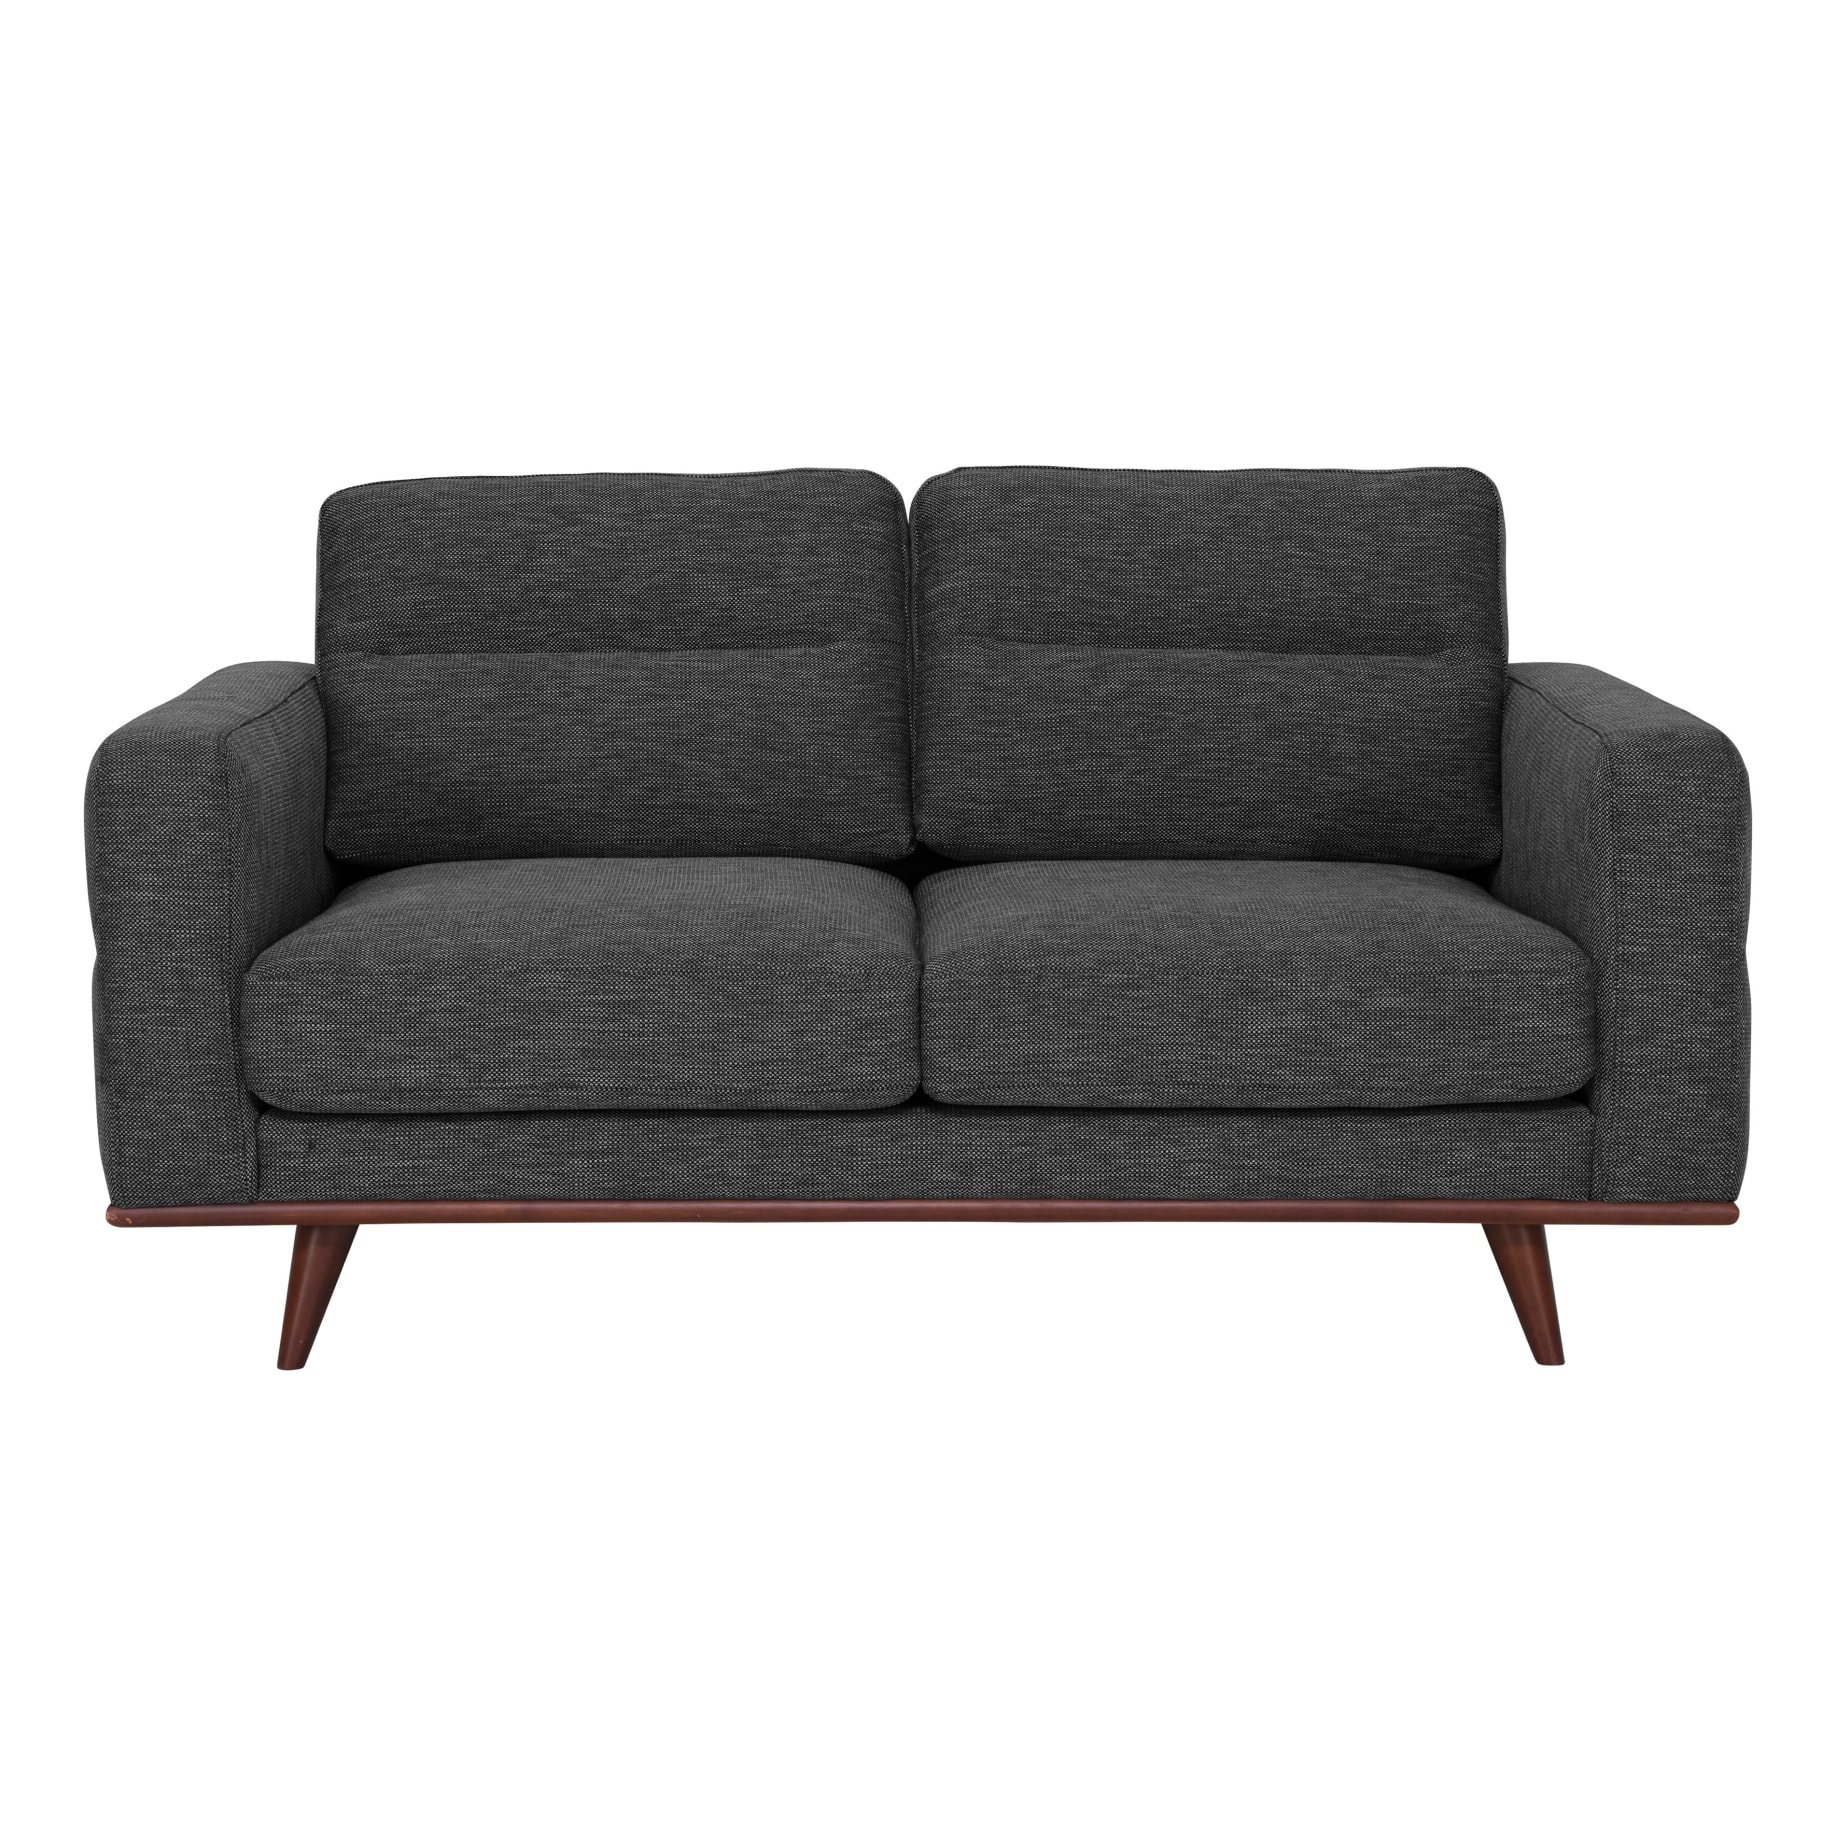 Astrid 2 Seater in Talent Charcoal